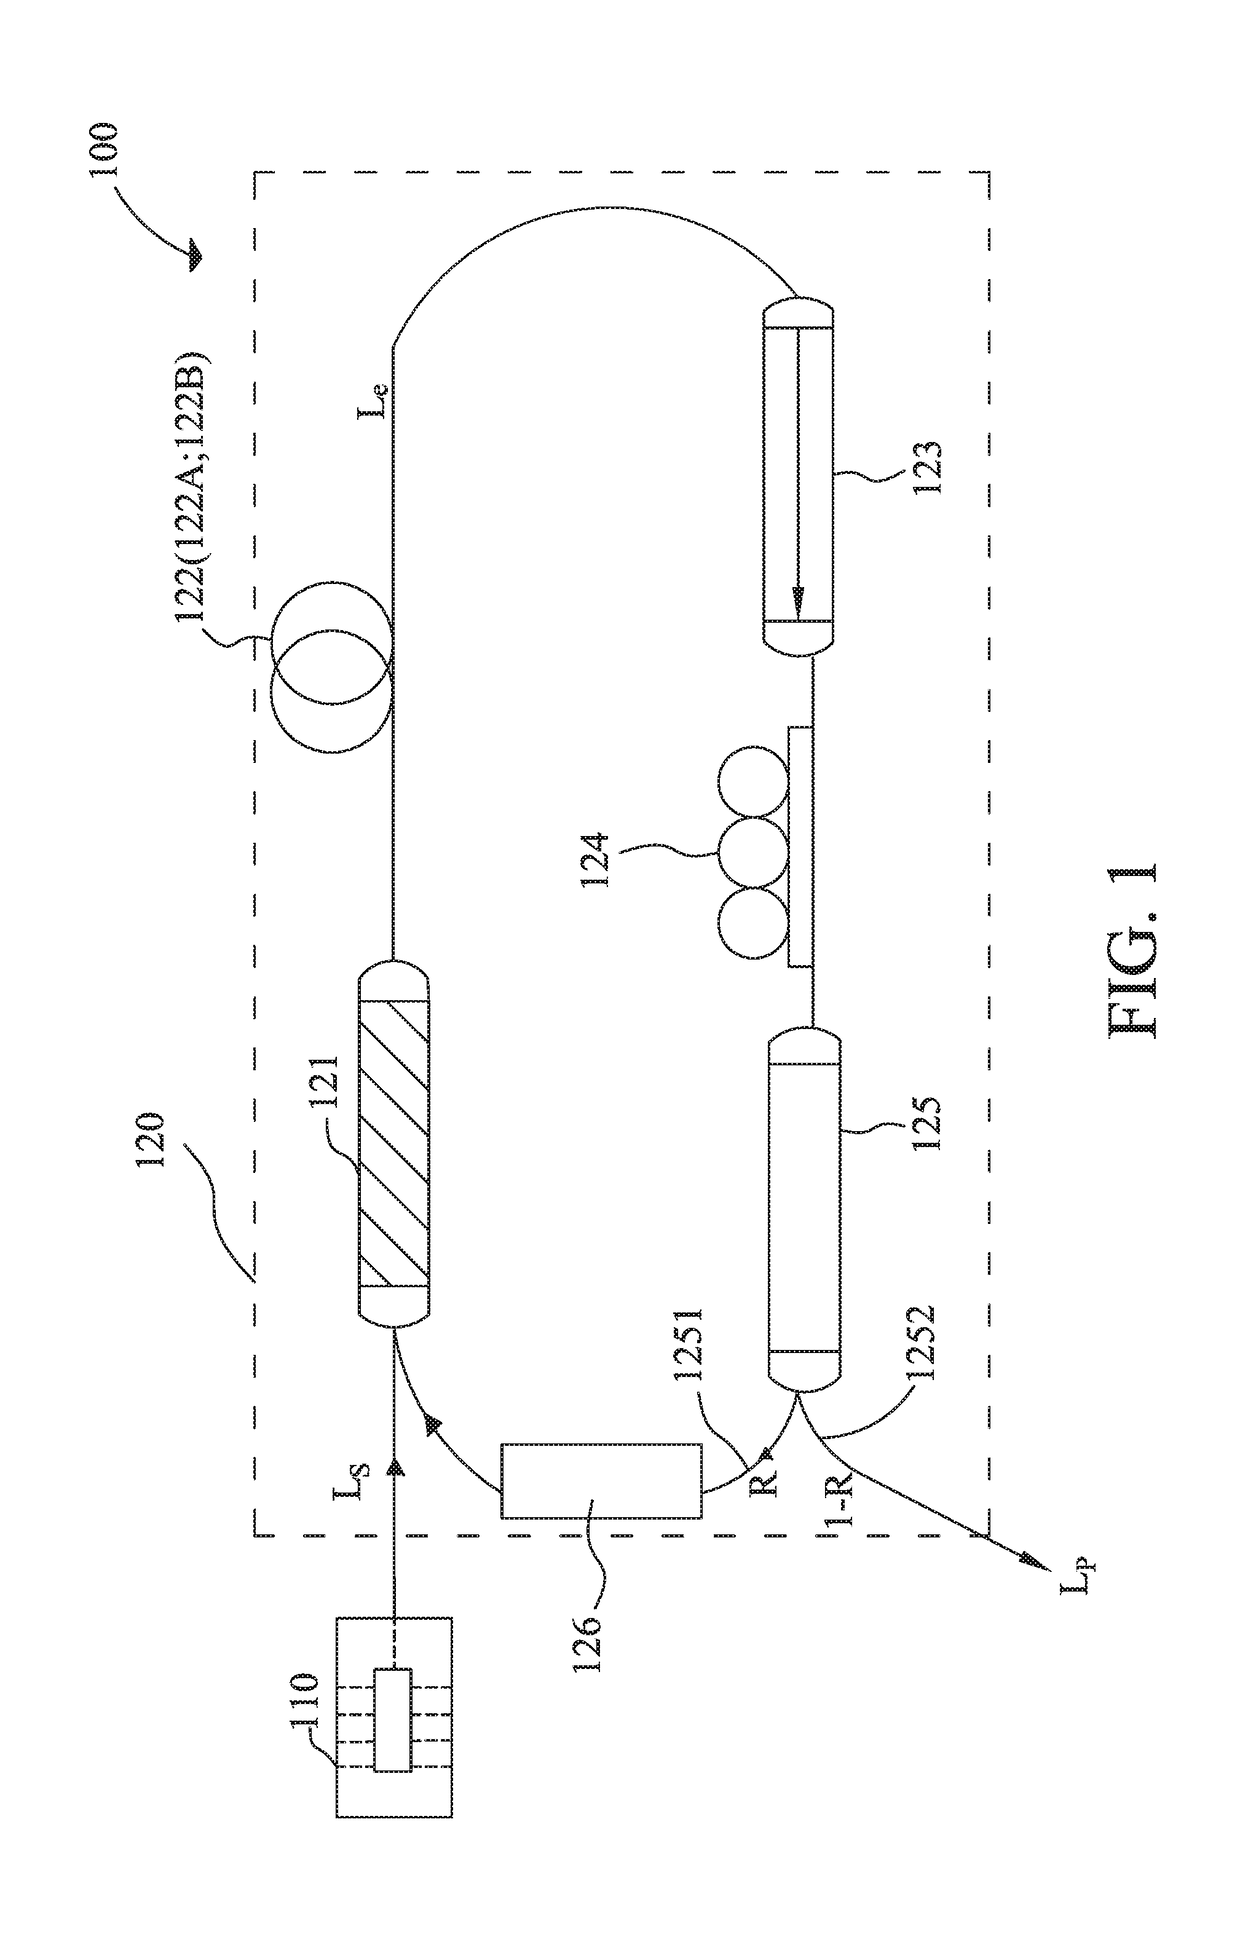 Passively q-switched fiber laser system and method for fabricating a saturable absorber of the system